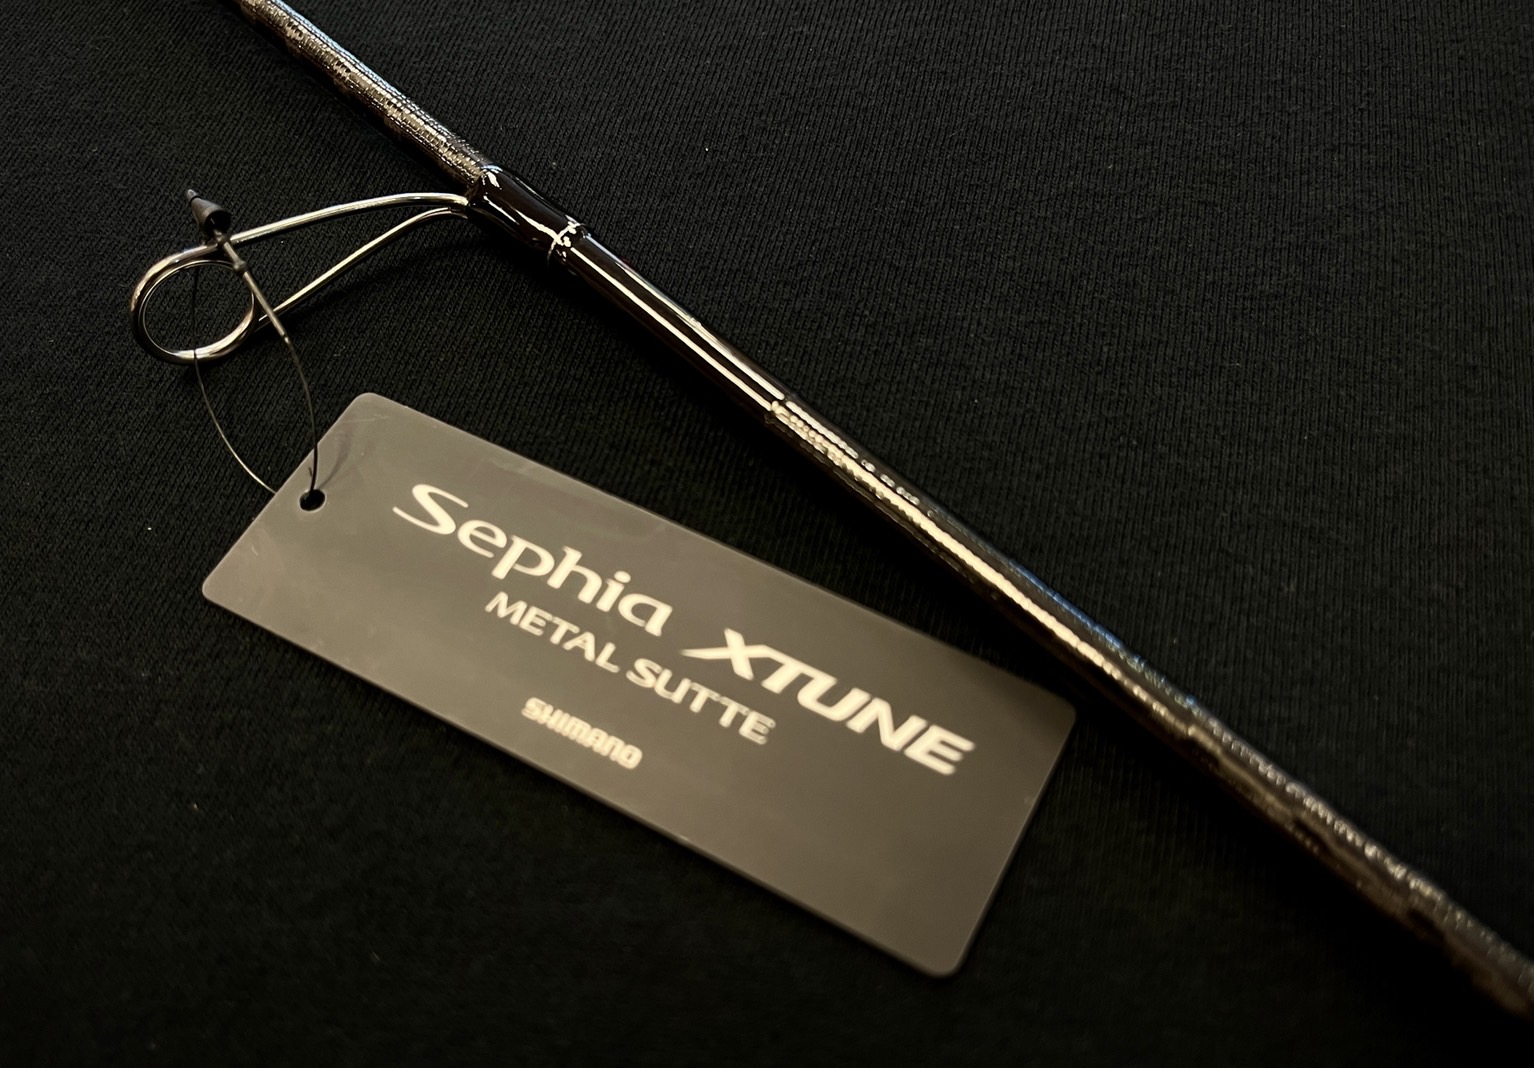 NEW ROD SHIMANO Sephia XTUNE METTE S610M-S/R | Rod | Tackle Berry